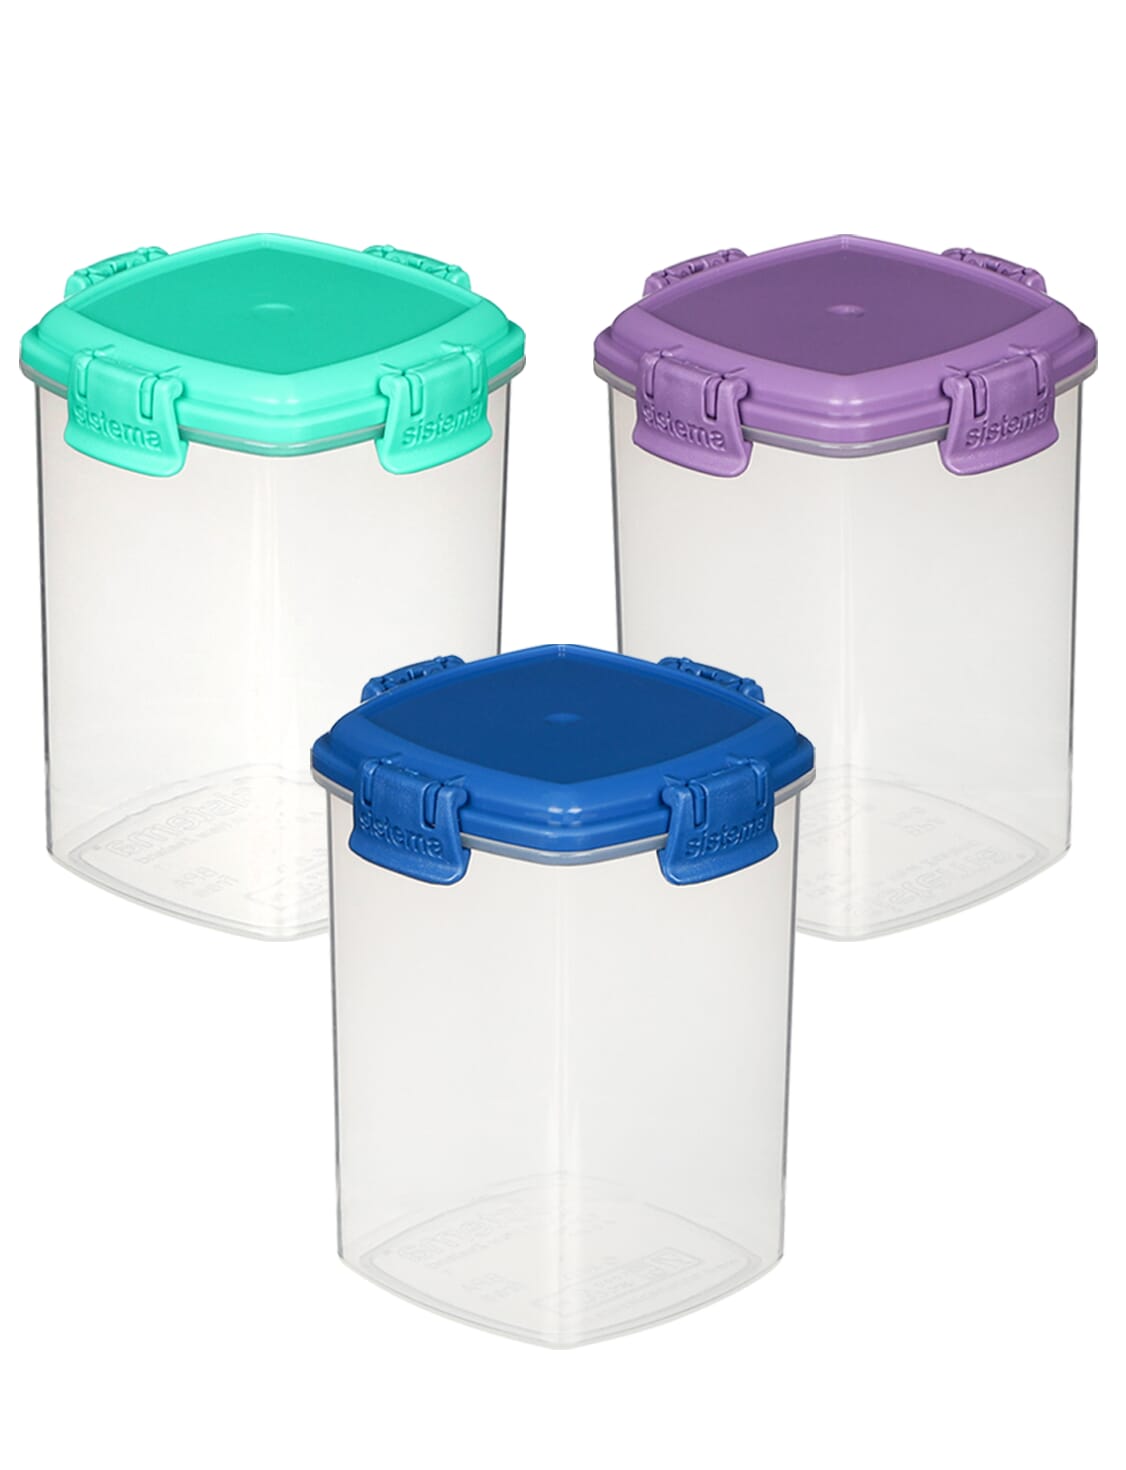 NEW SISTEMA KNICK KNACK PACK SMALL SNACK REUSABLE SNACK SIZE CONTAINER 3 PACK 